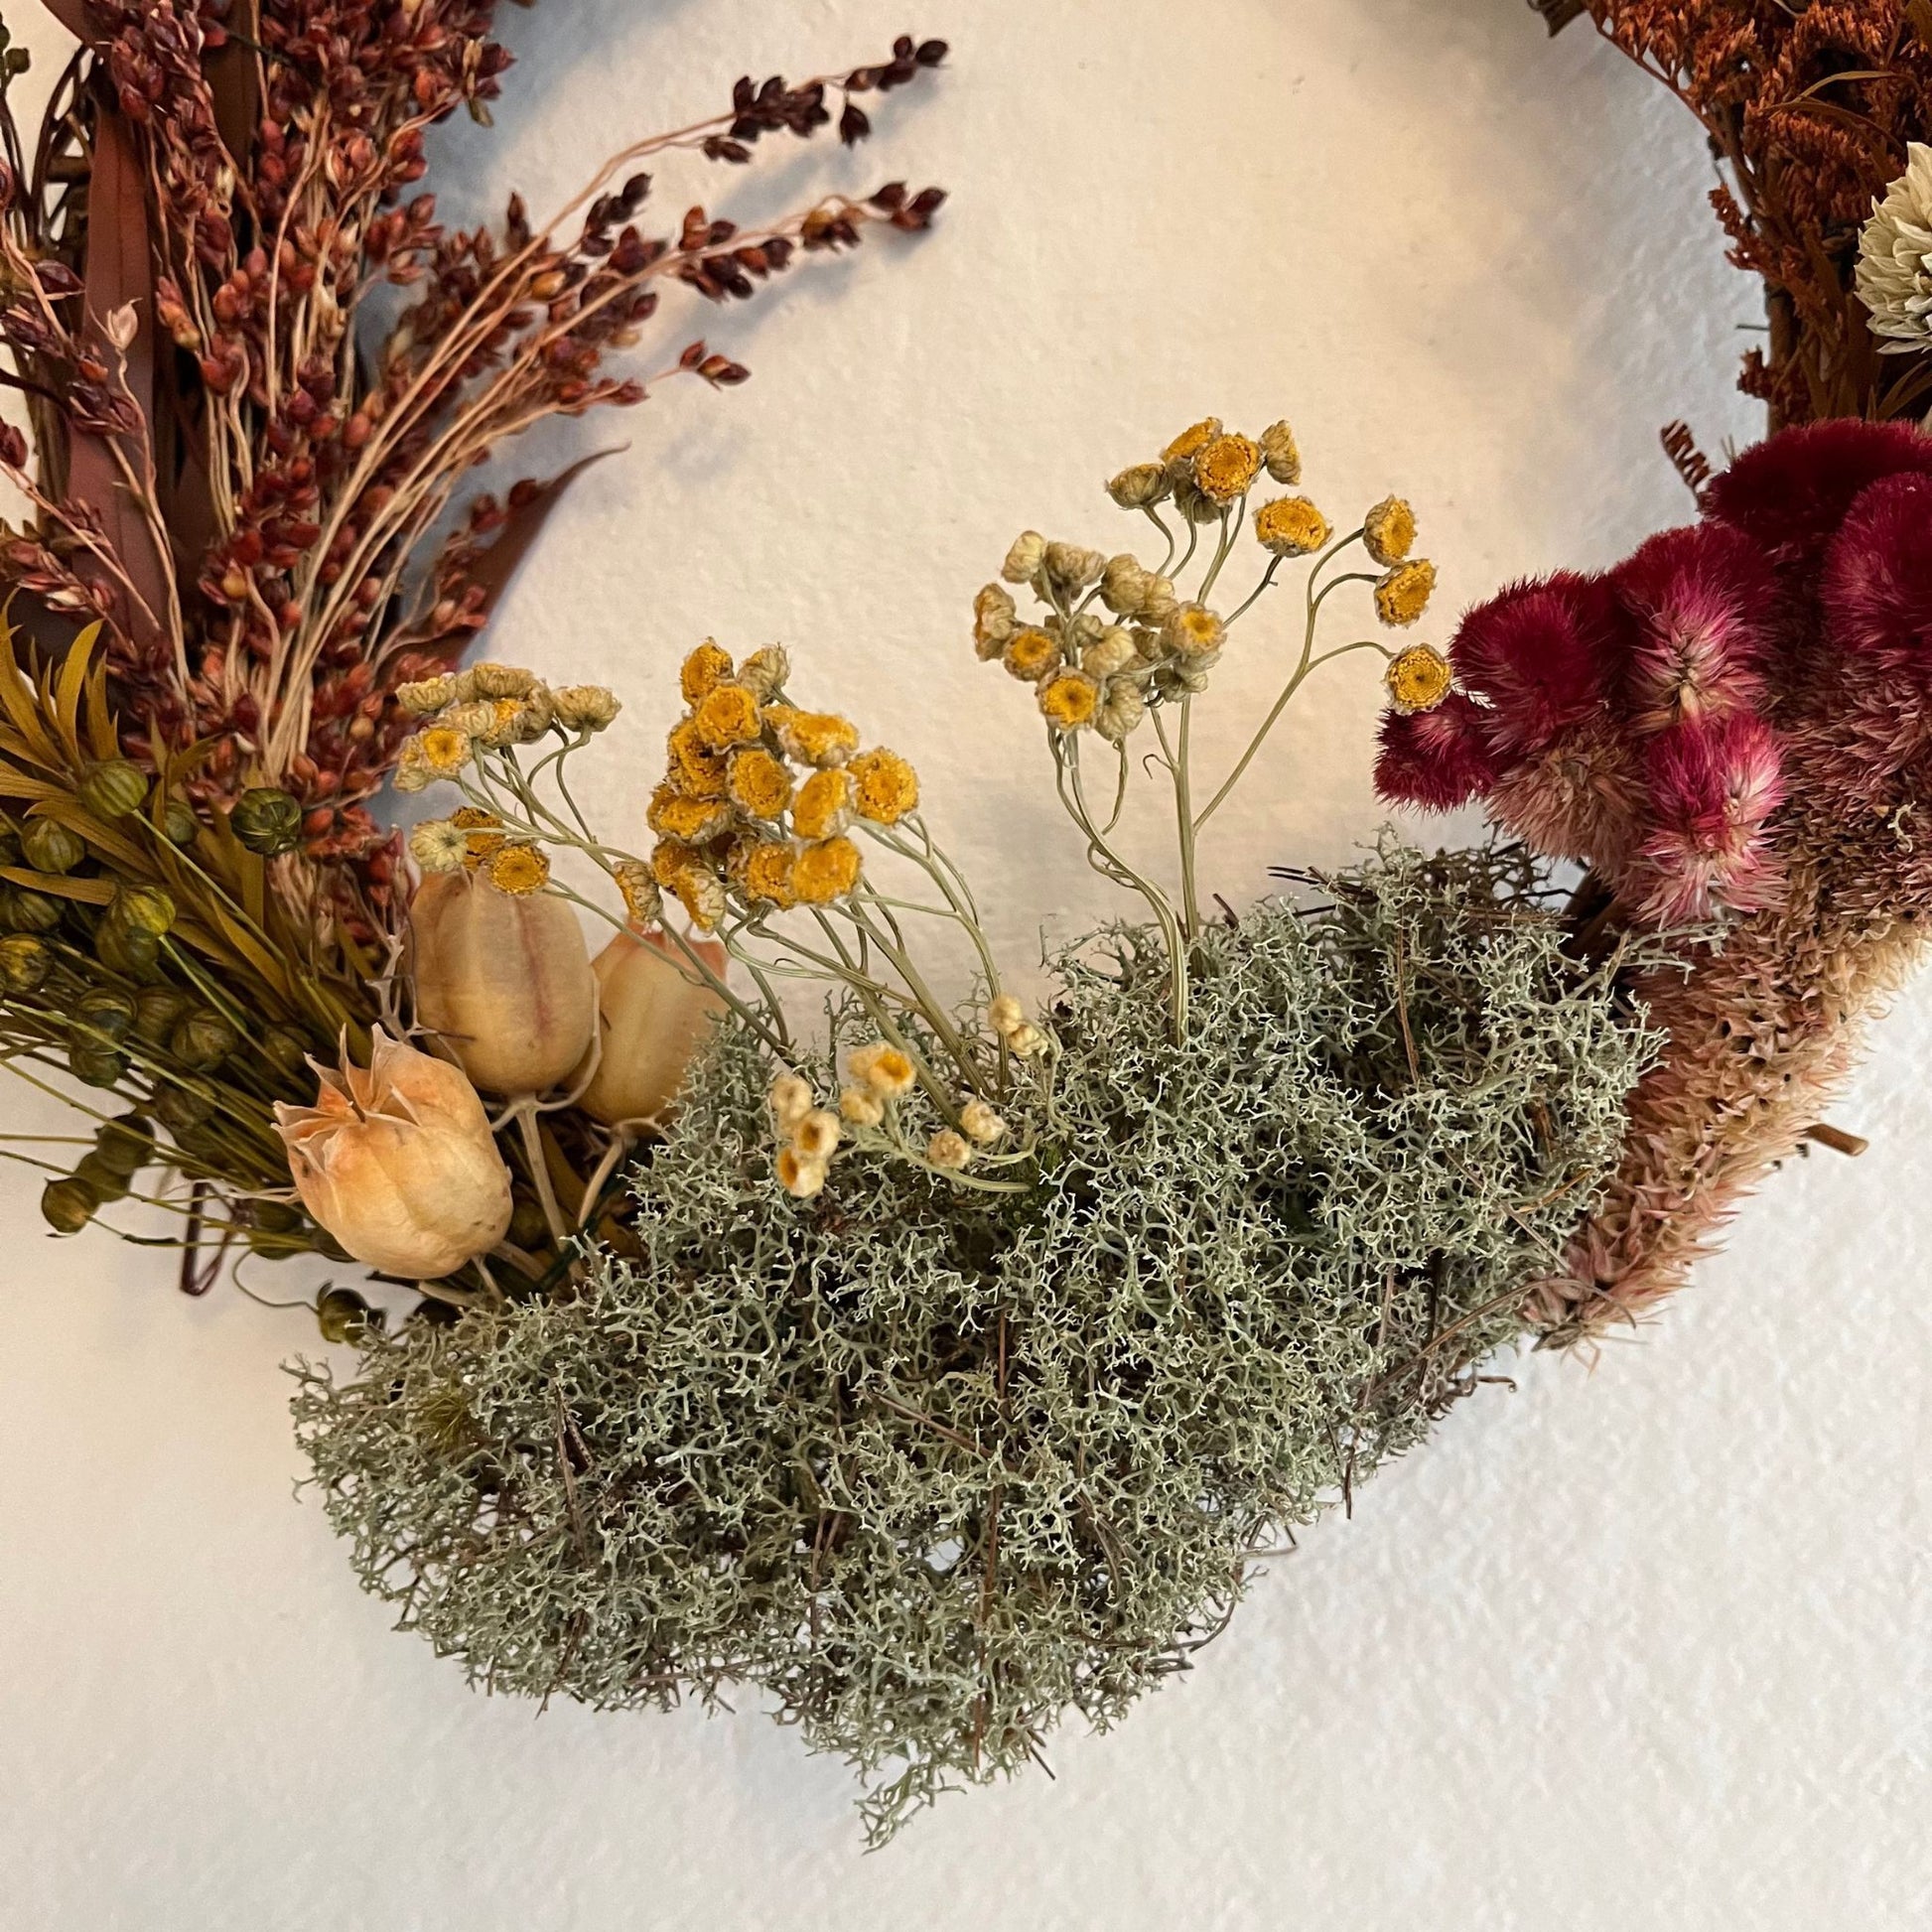 Dried Floral Wreath with Eucalyptus handmade in Catskill NY. 11.5 x 10 Inches.